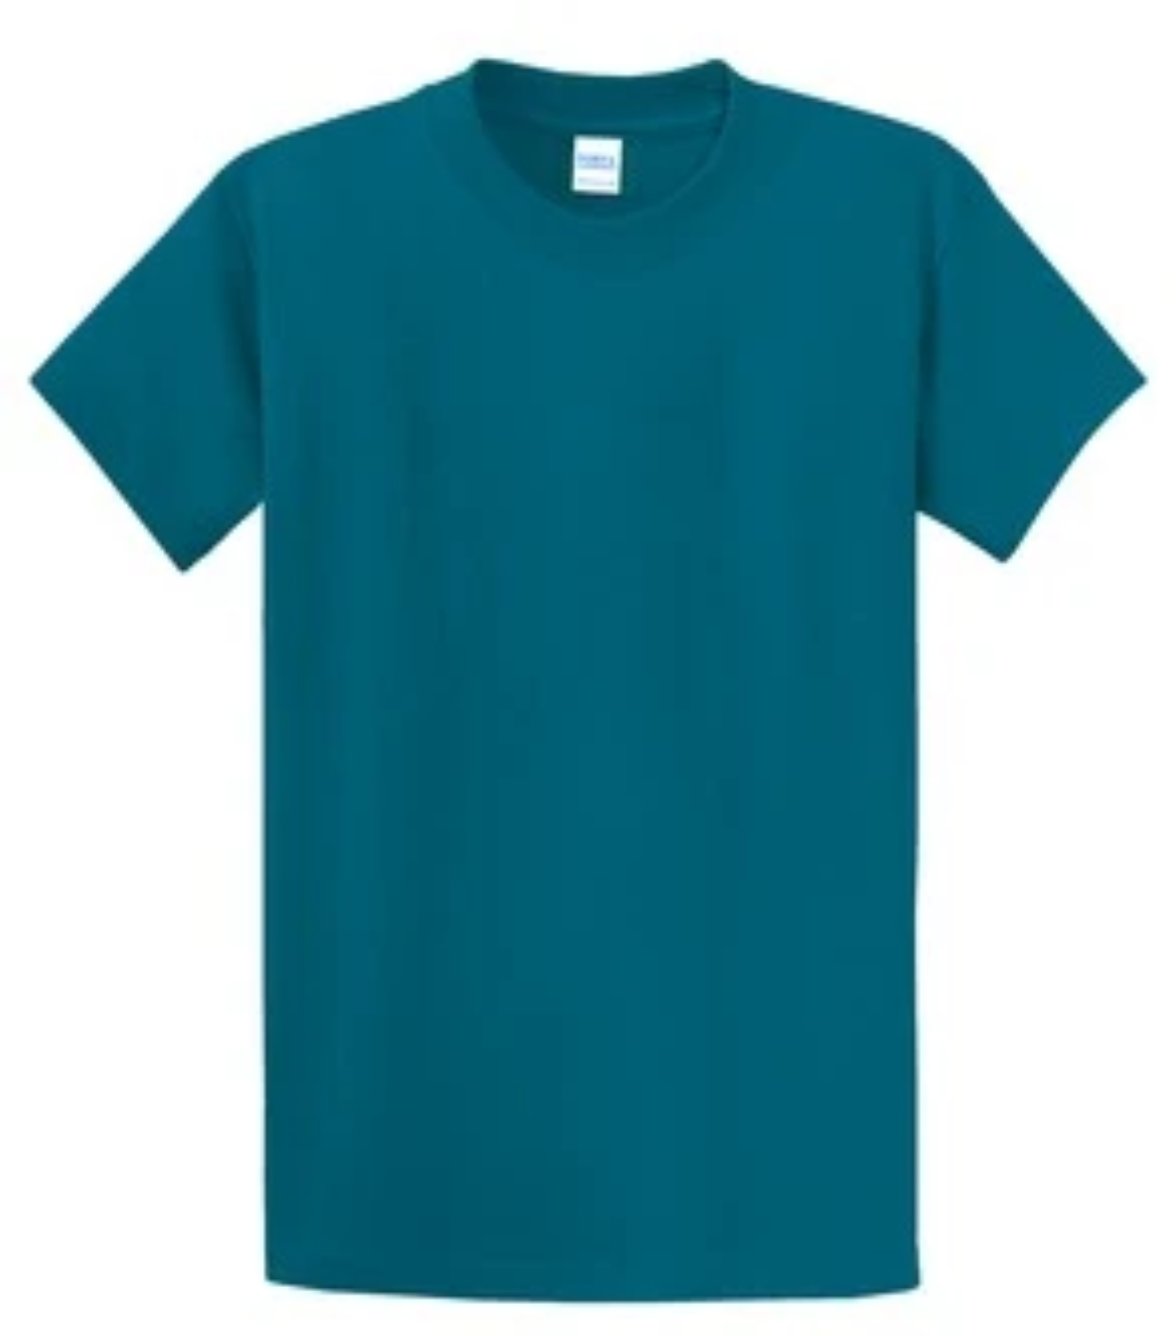 Port & Company 100% Cotton Essential T-Shirt Teal Tall PC61T